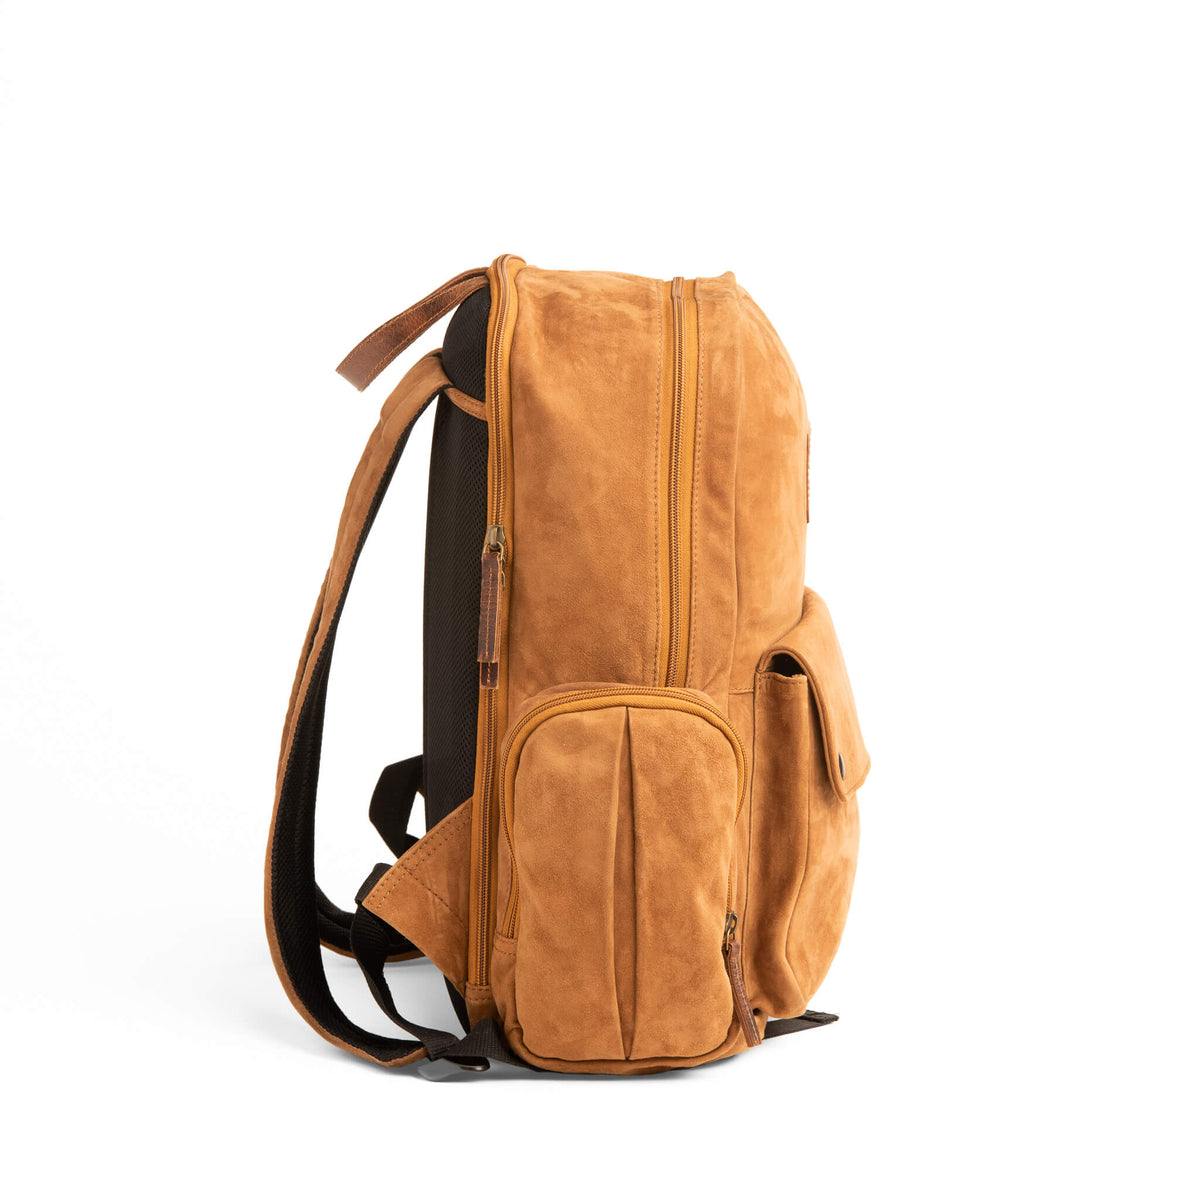 Goat Suede Leather Backpack